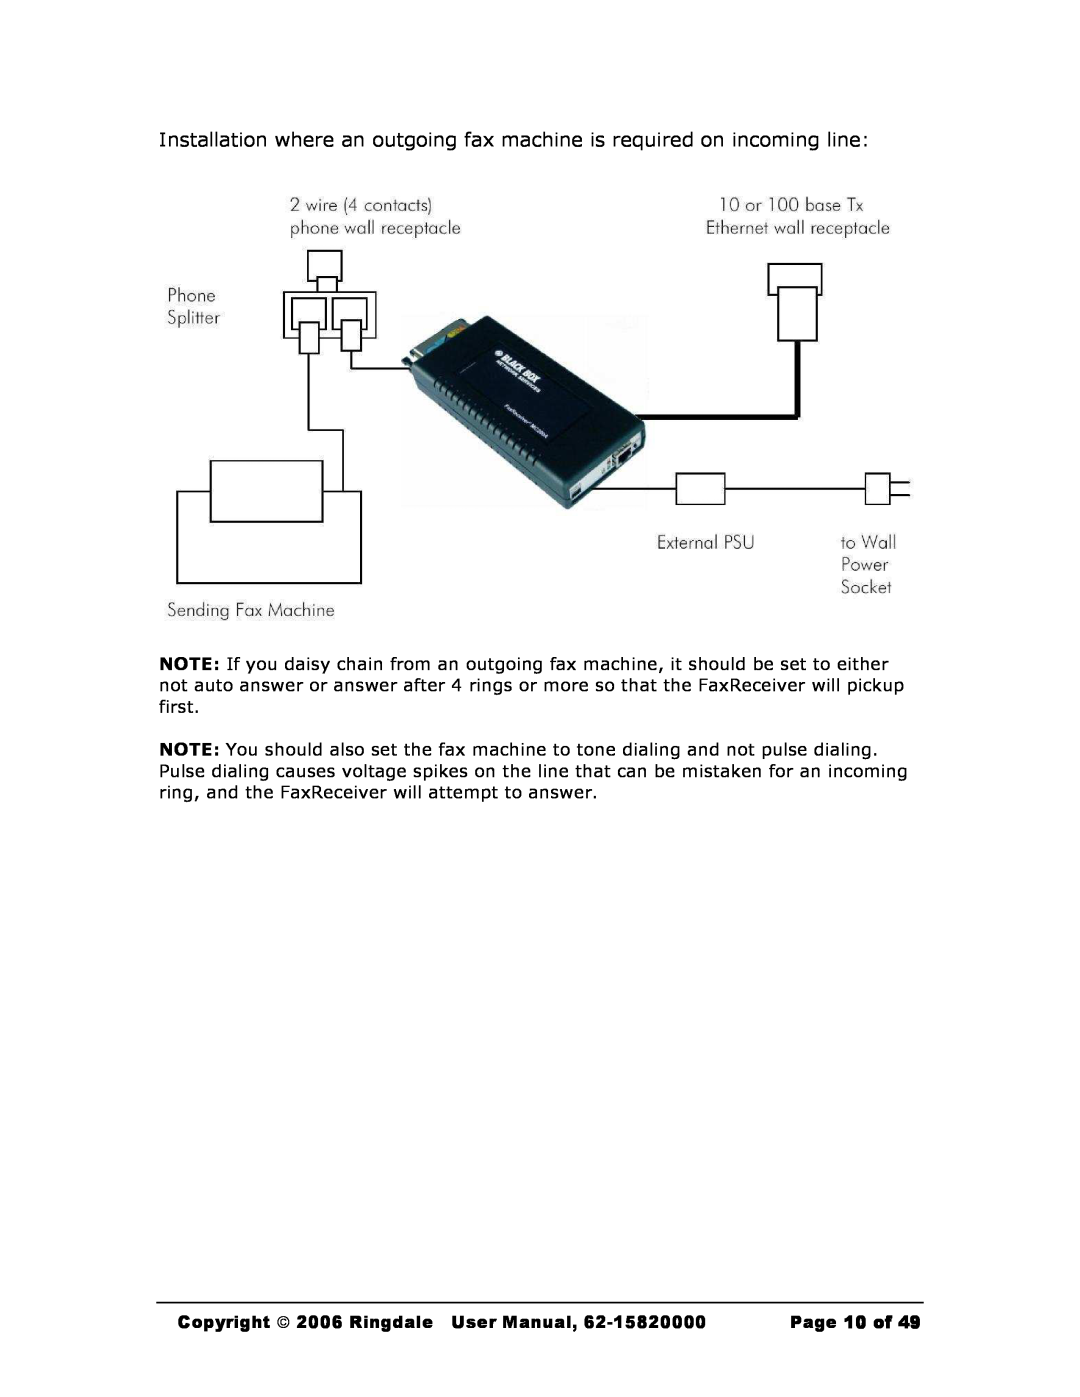 Black Box MC200A, Black Box Network Services FaxReceiver user manual Copyright  2006 Ringdale User Manual, Page 10 of 